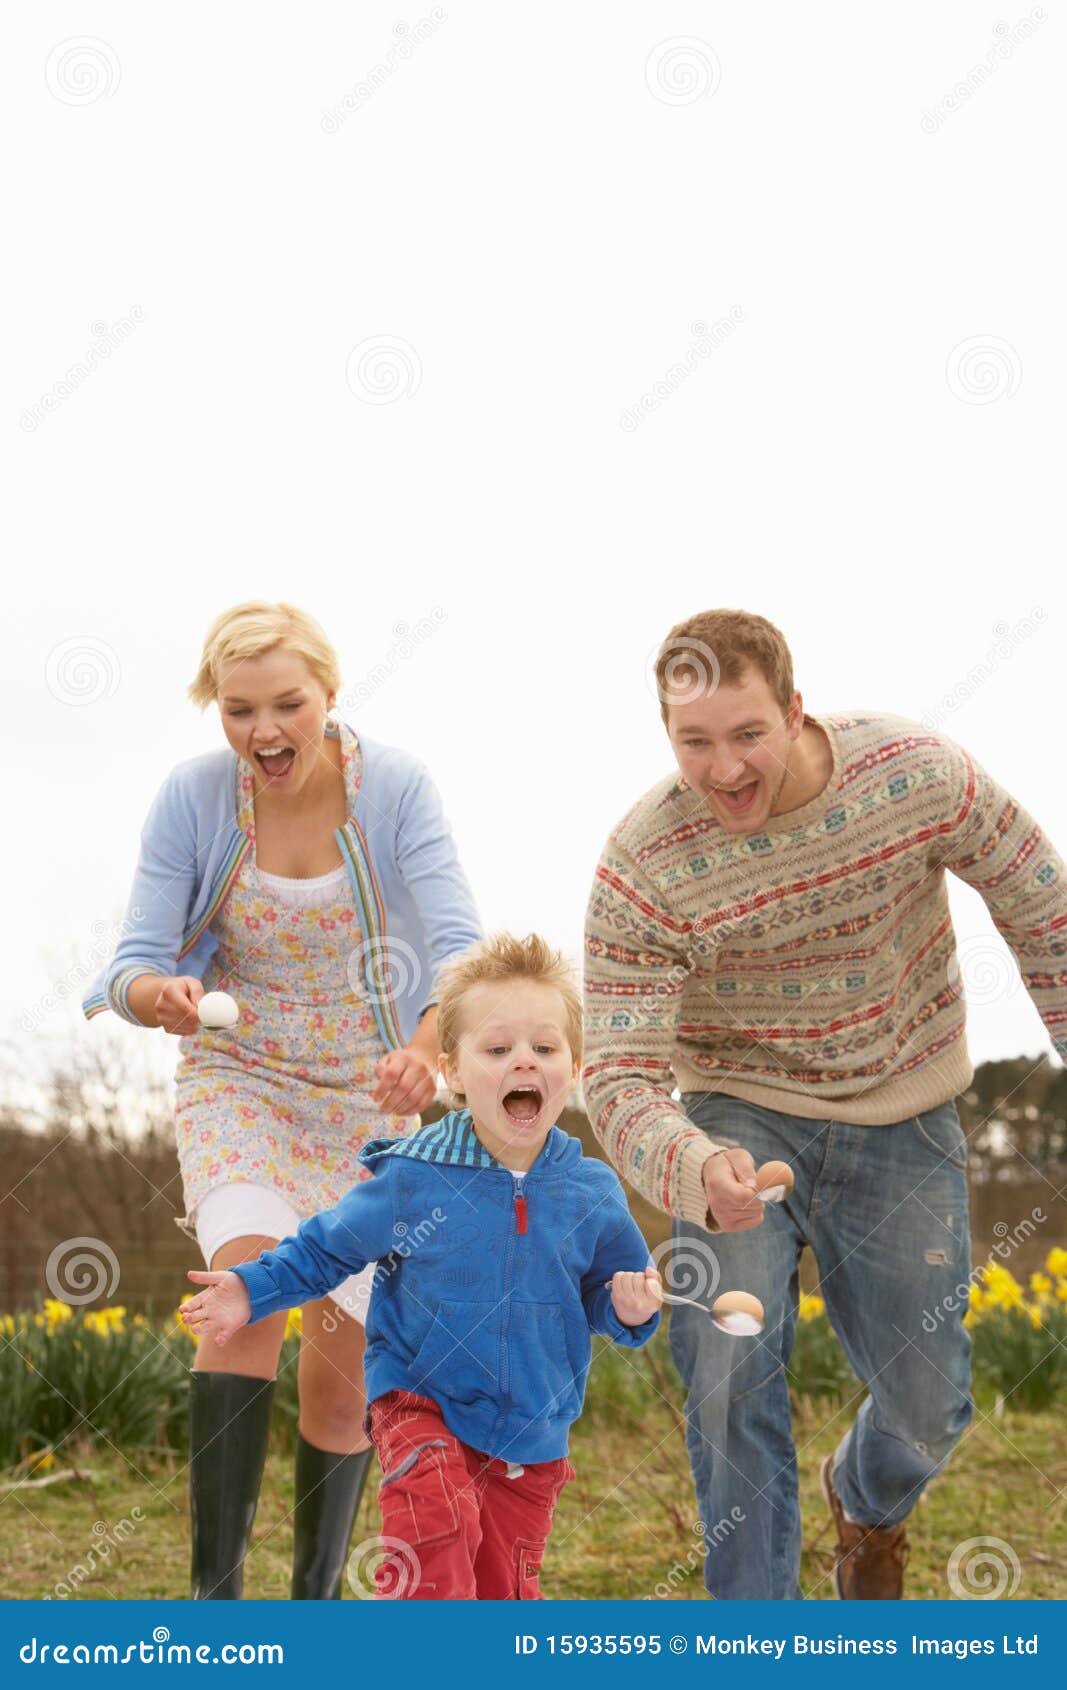 family having egg and spoon race